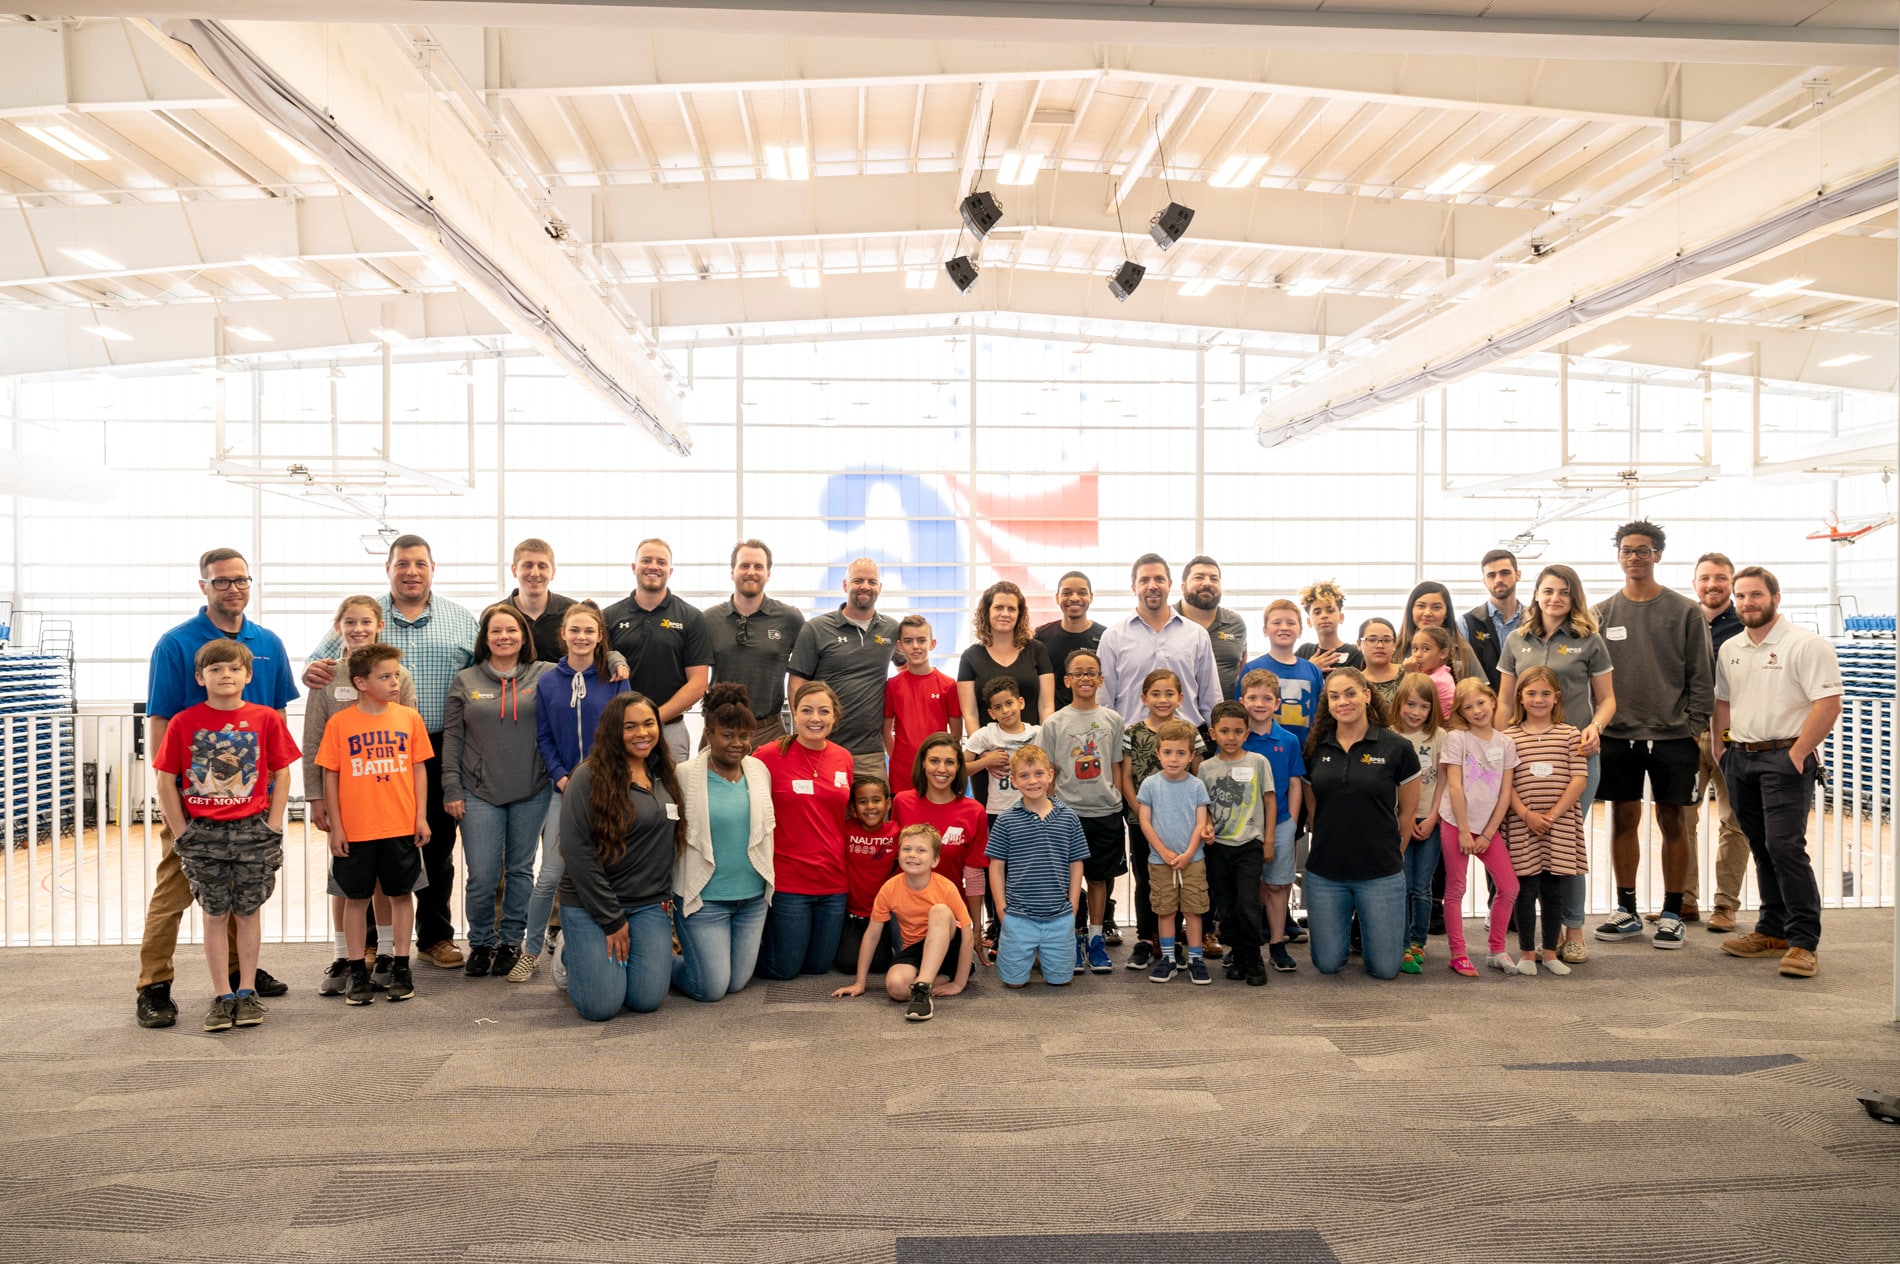 The Buccini/Pollin Group Celebrates Second Annual Take Your Kids To Work Day Partnered With Buckets Of Love